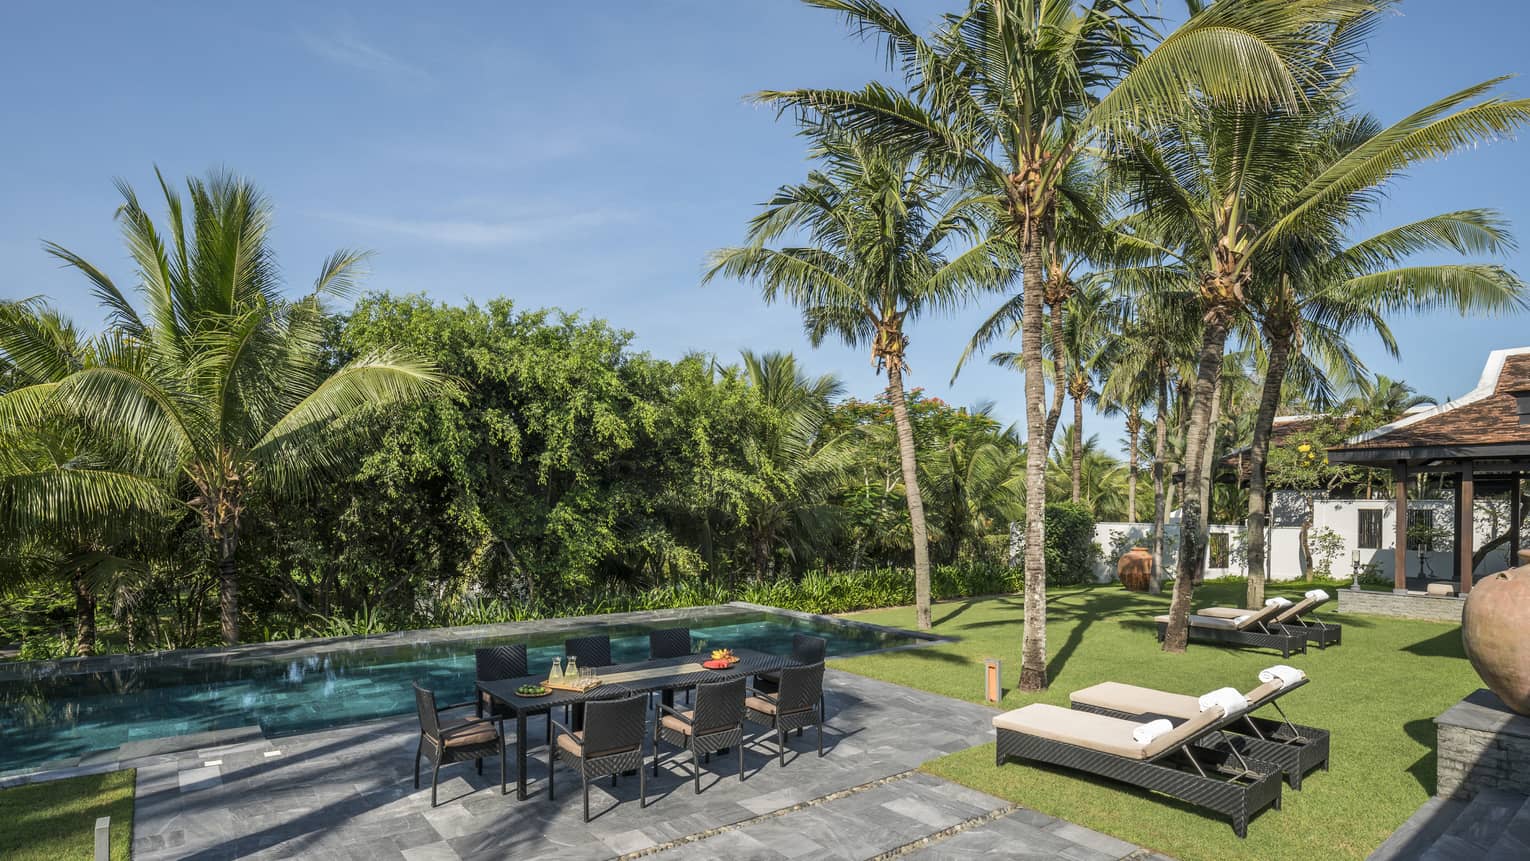 Three-Bedroom Hilltop Residence pool area with dining table, lounge chairs, palm trees and sunshine